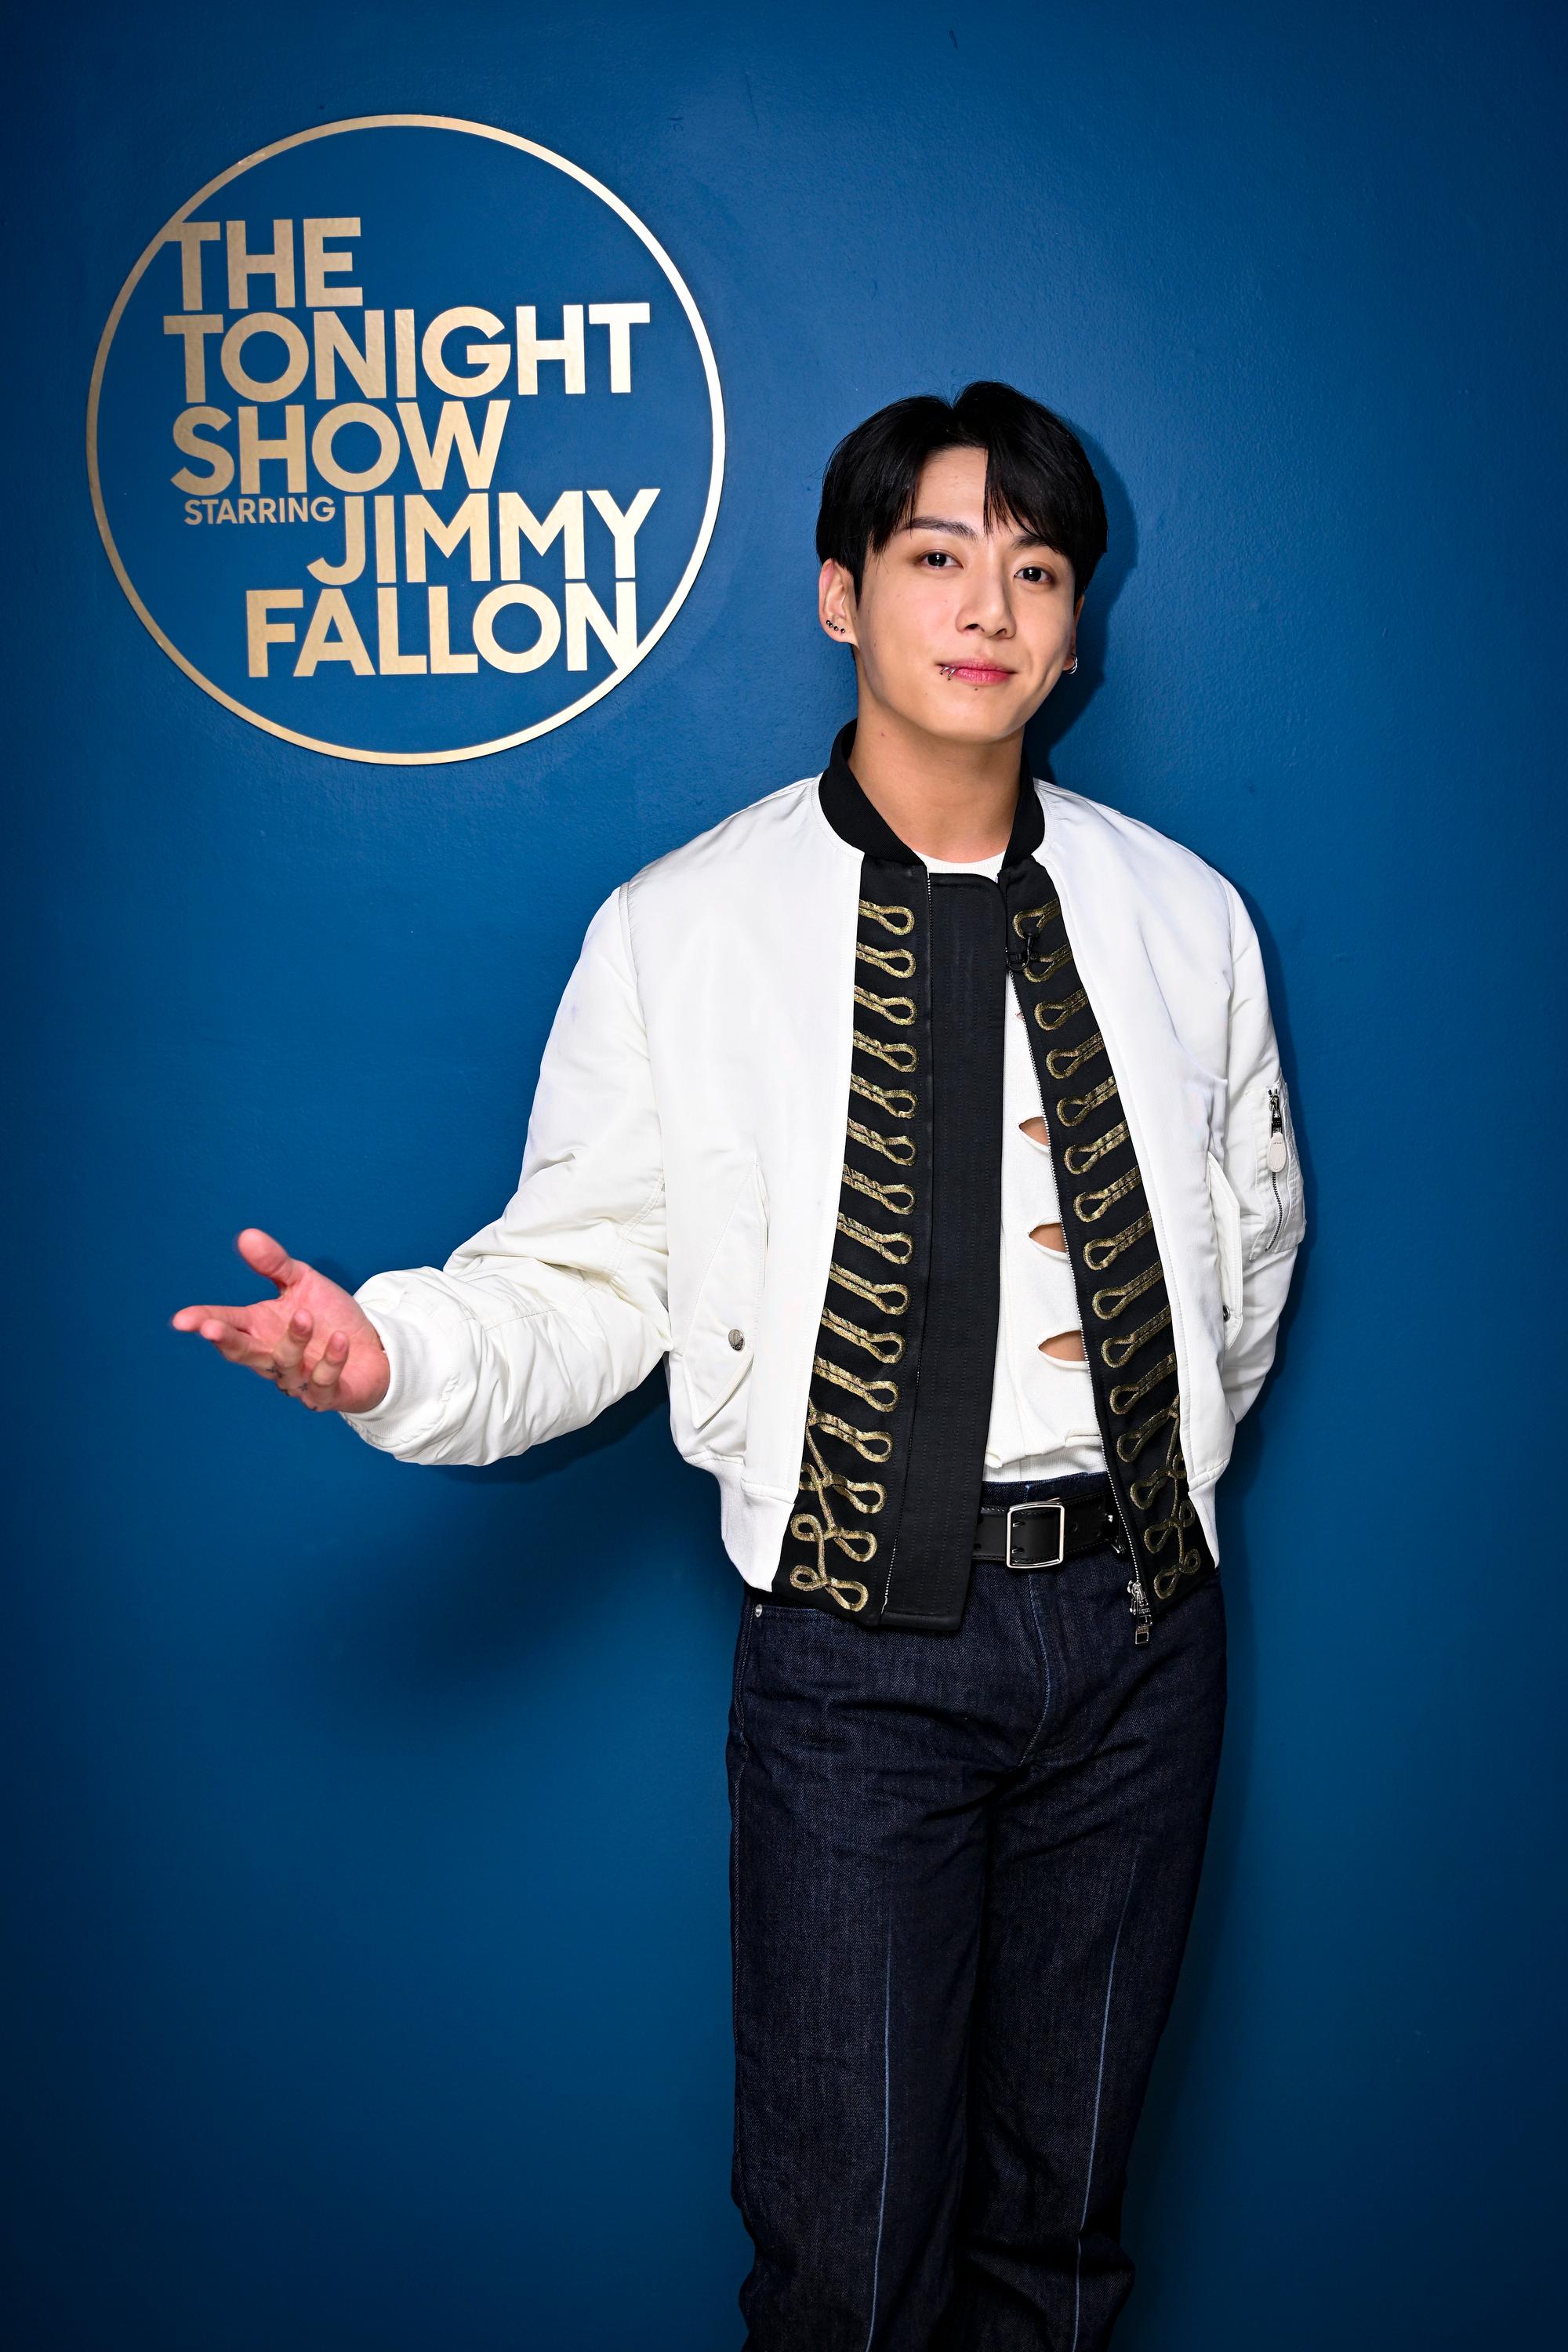 BTS Jungkook made his solo appearance on The Tonight Show with Jimmy Fallon.